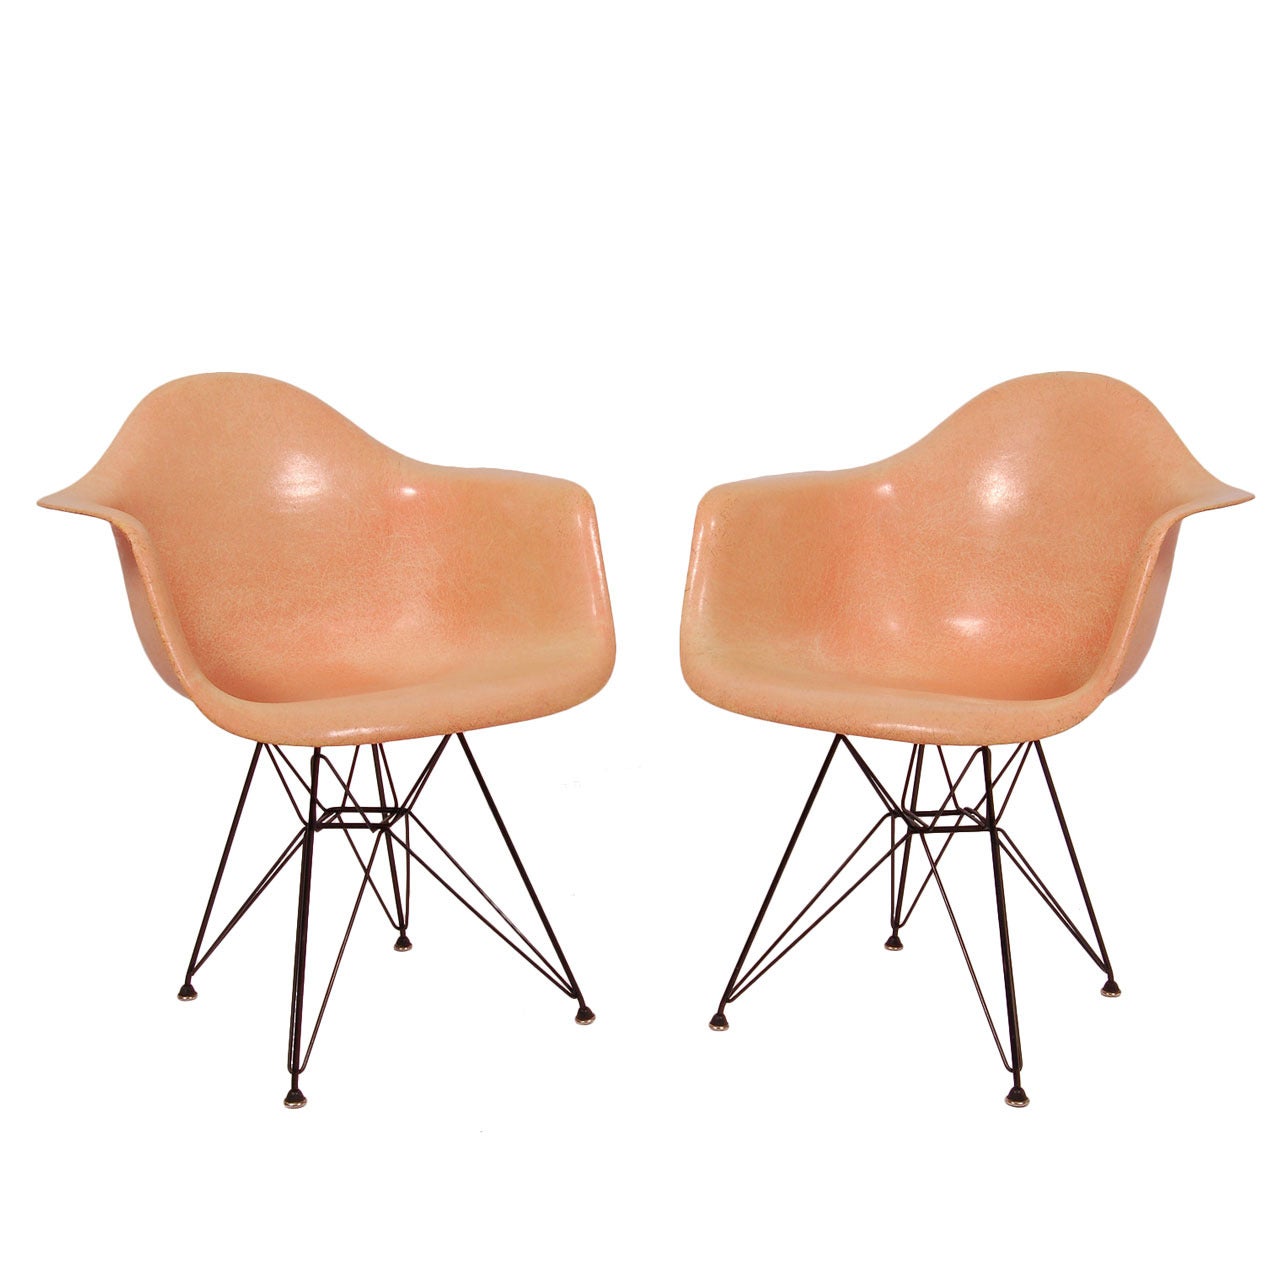 Pair of Early Charles Eames Fiberglass Armchairs